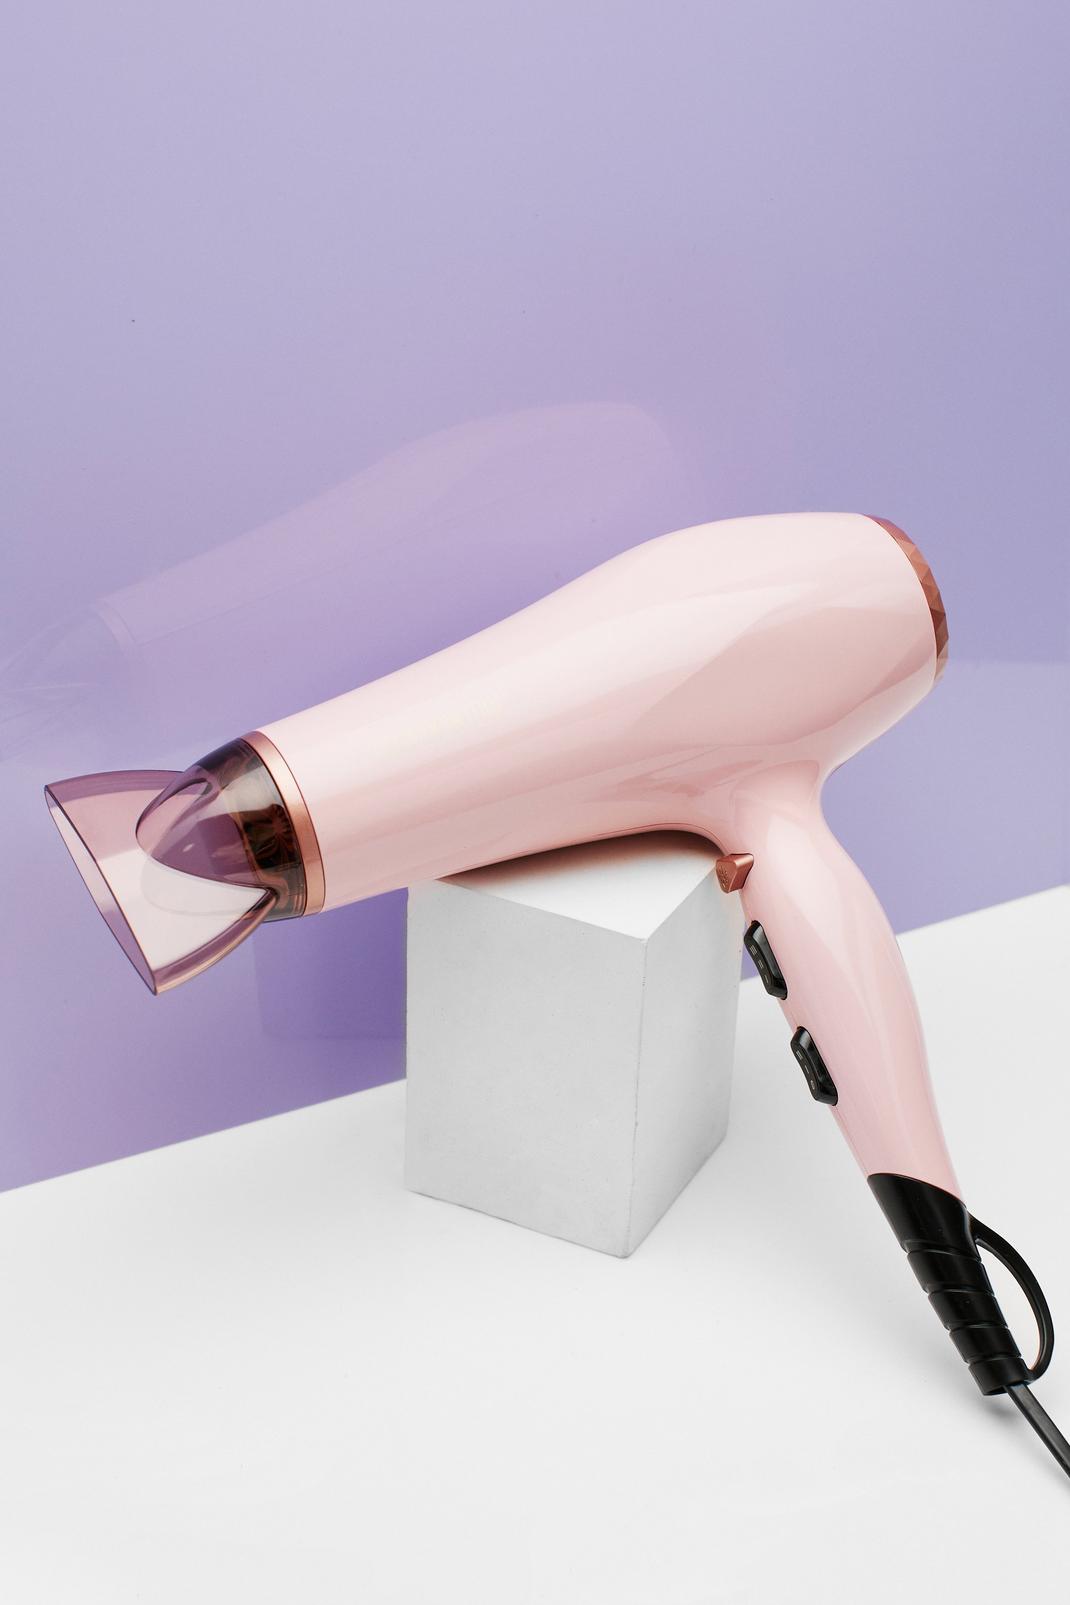 Cosmopolitan 2200W Cotton Candy Hair Dryer, Pink image number 1